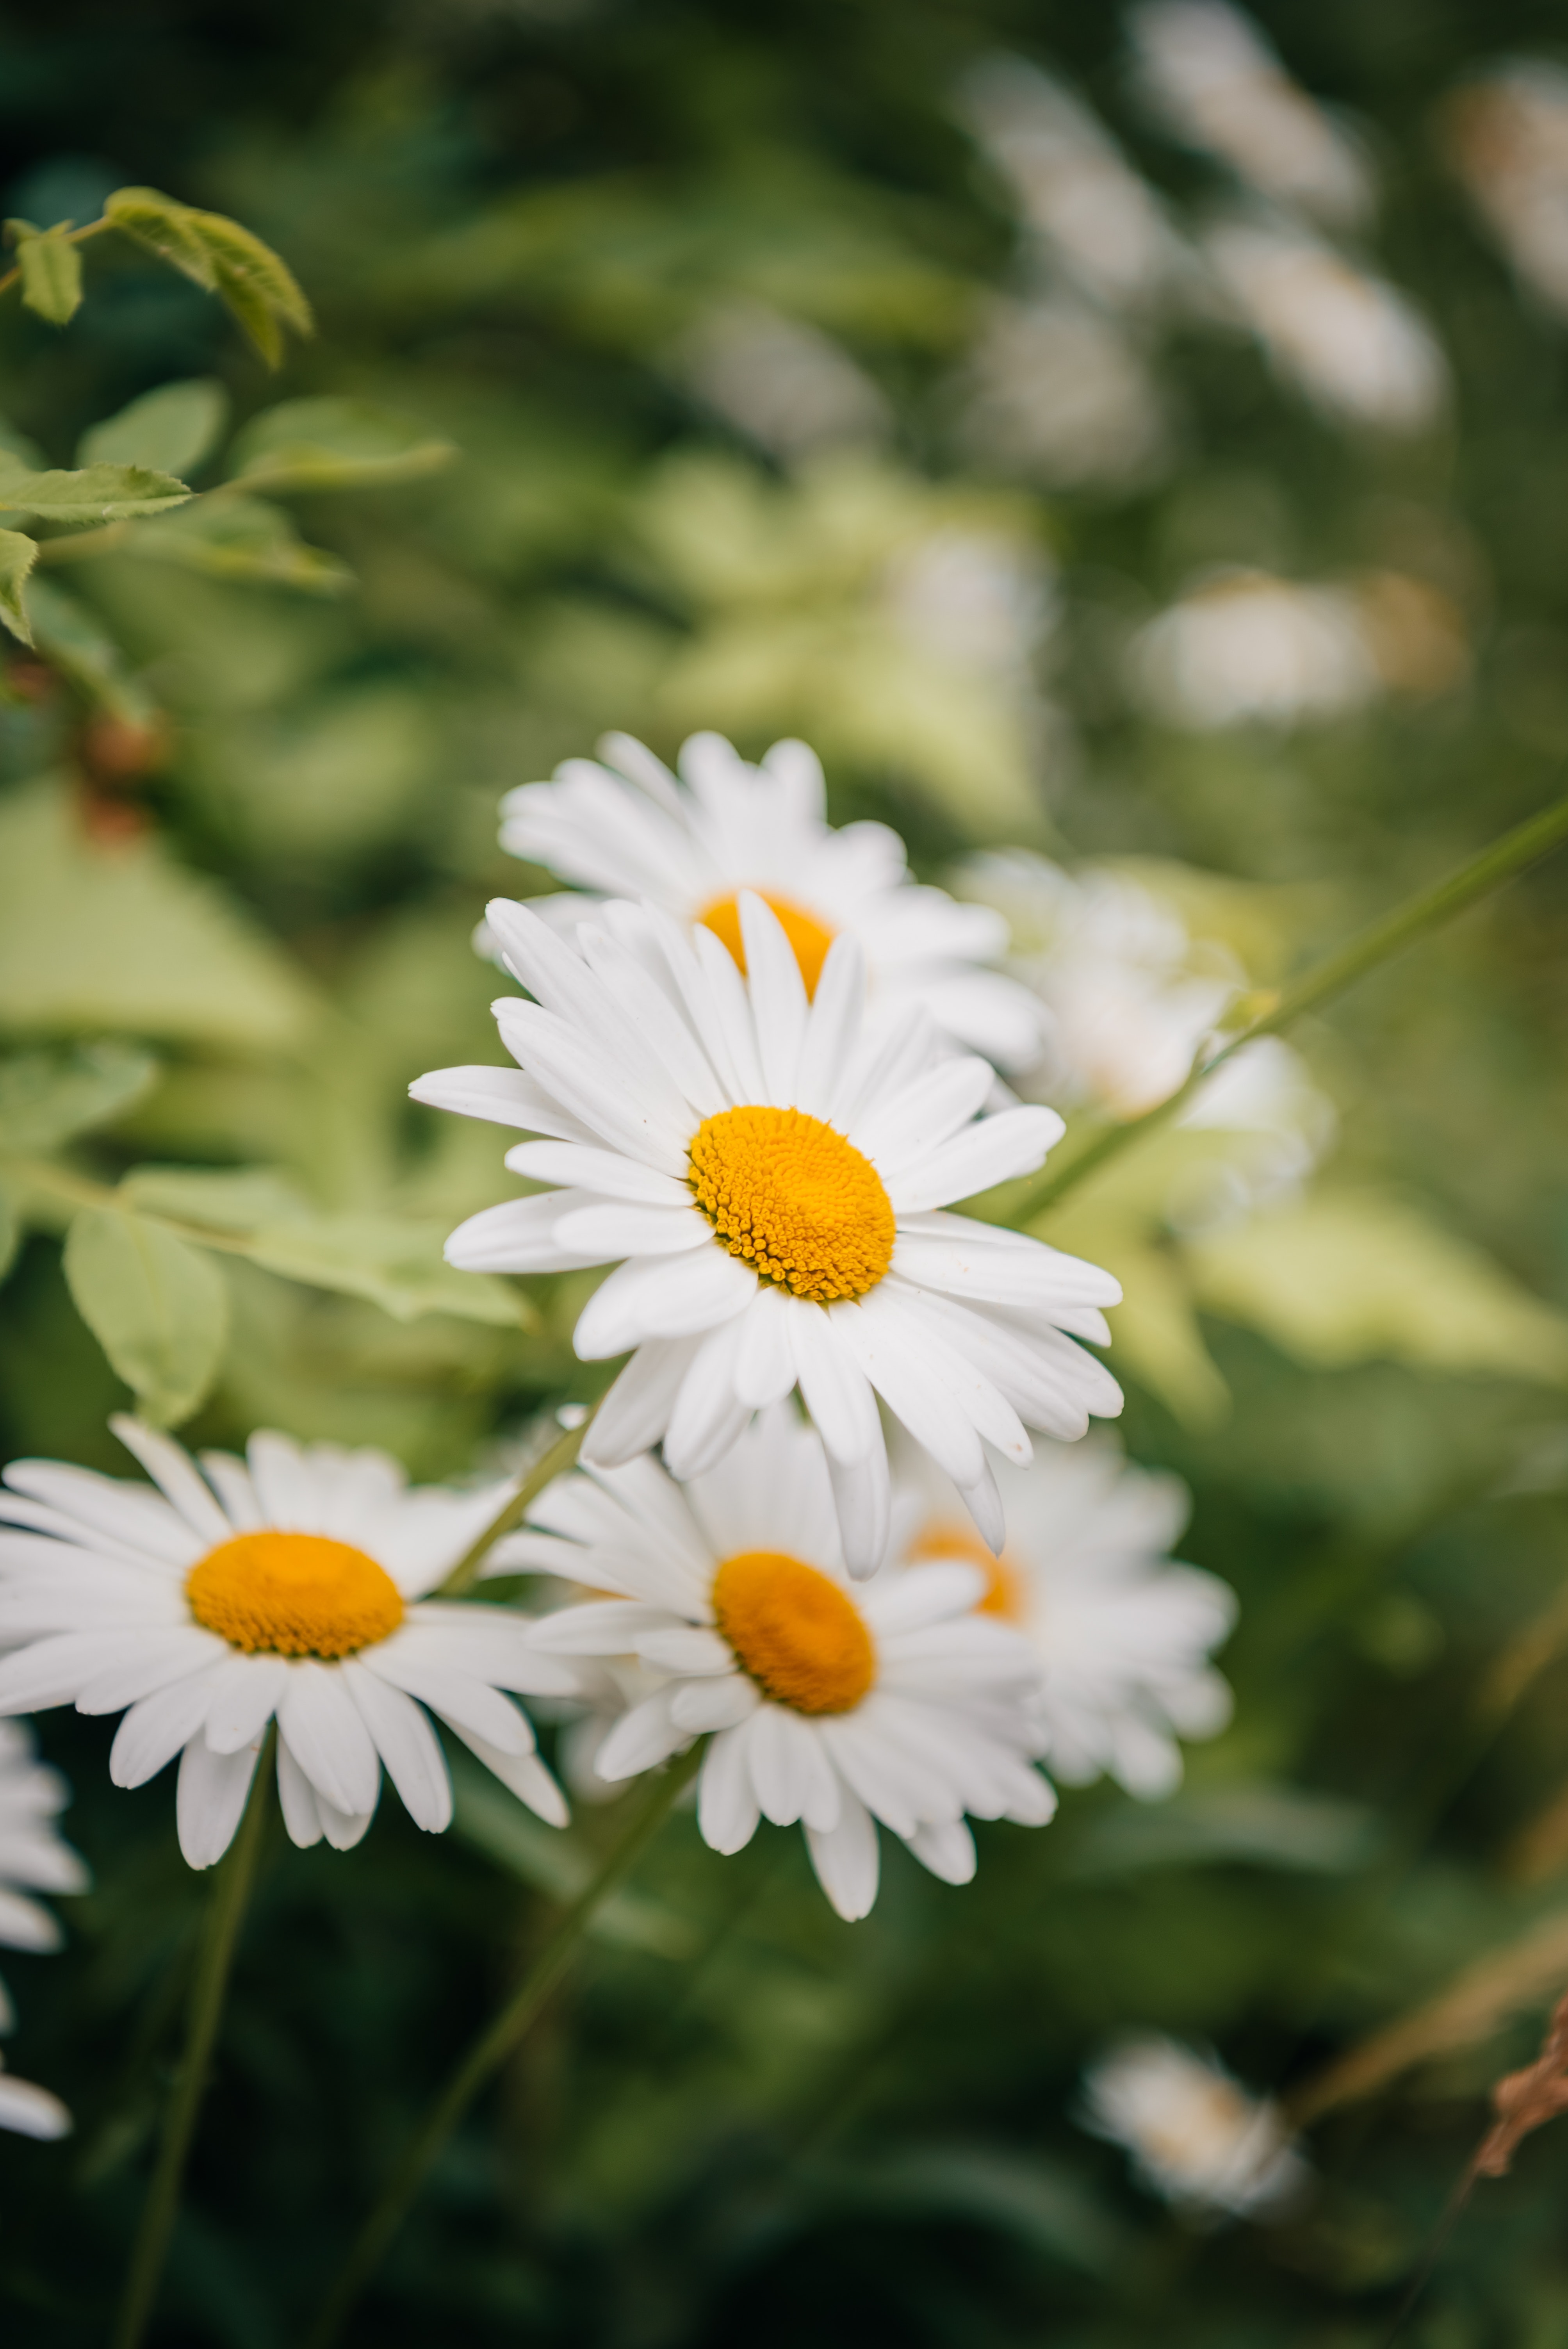 A close-up of white daisies with yellow centers. - Daisy